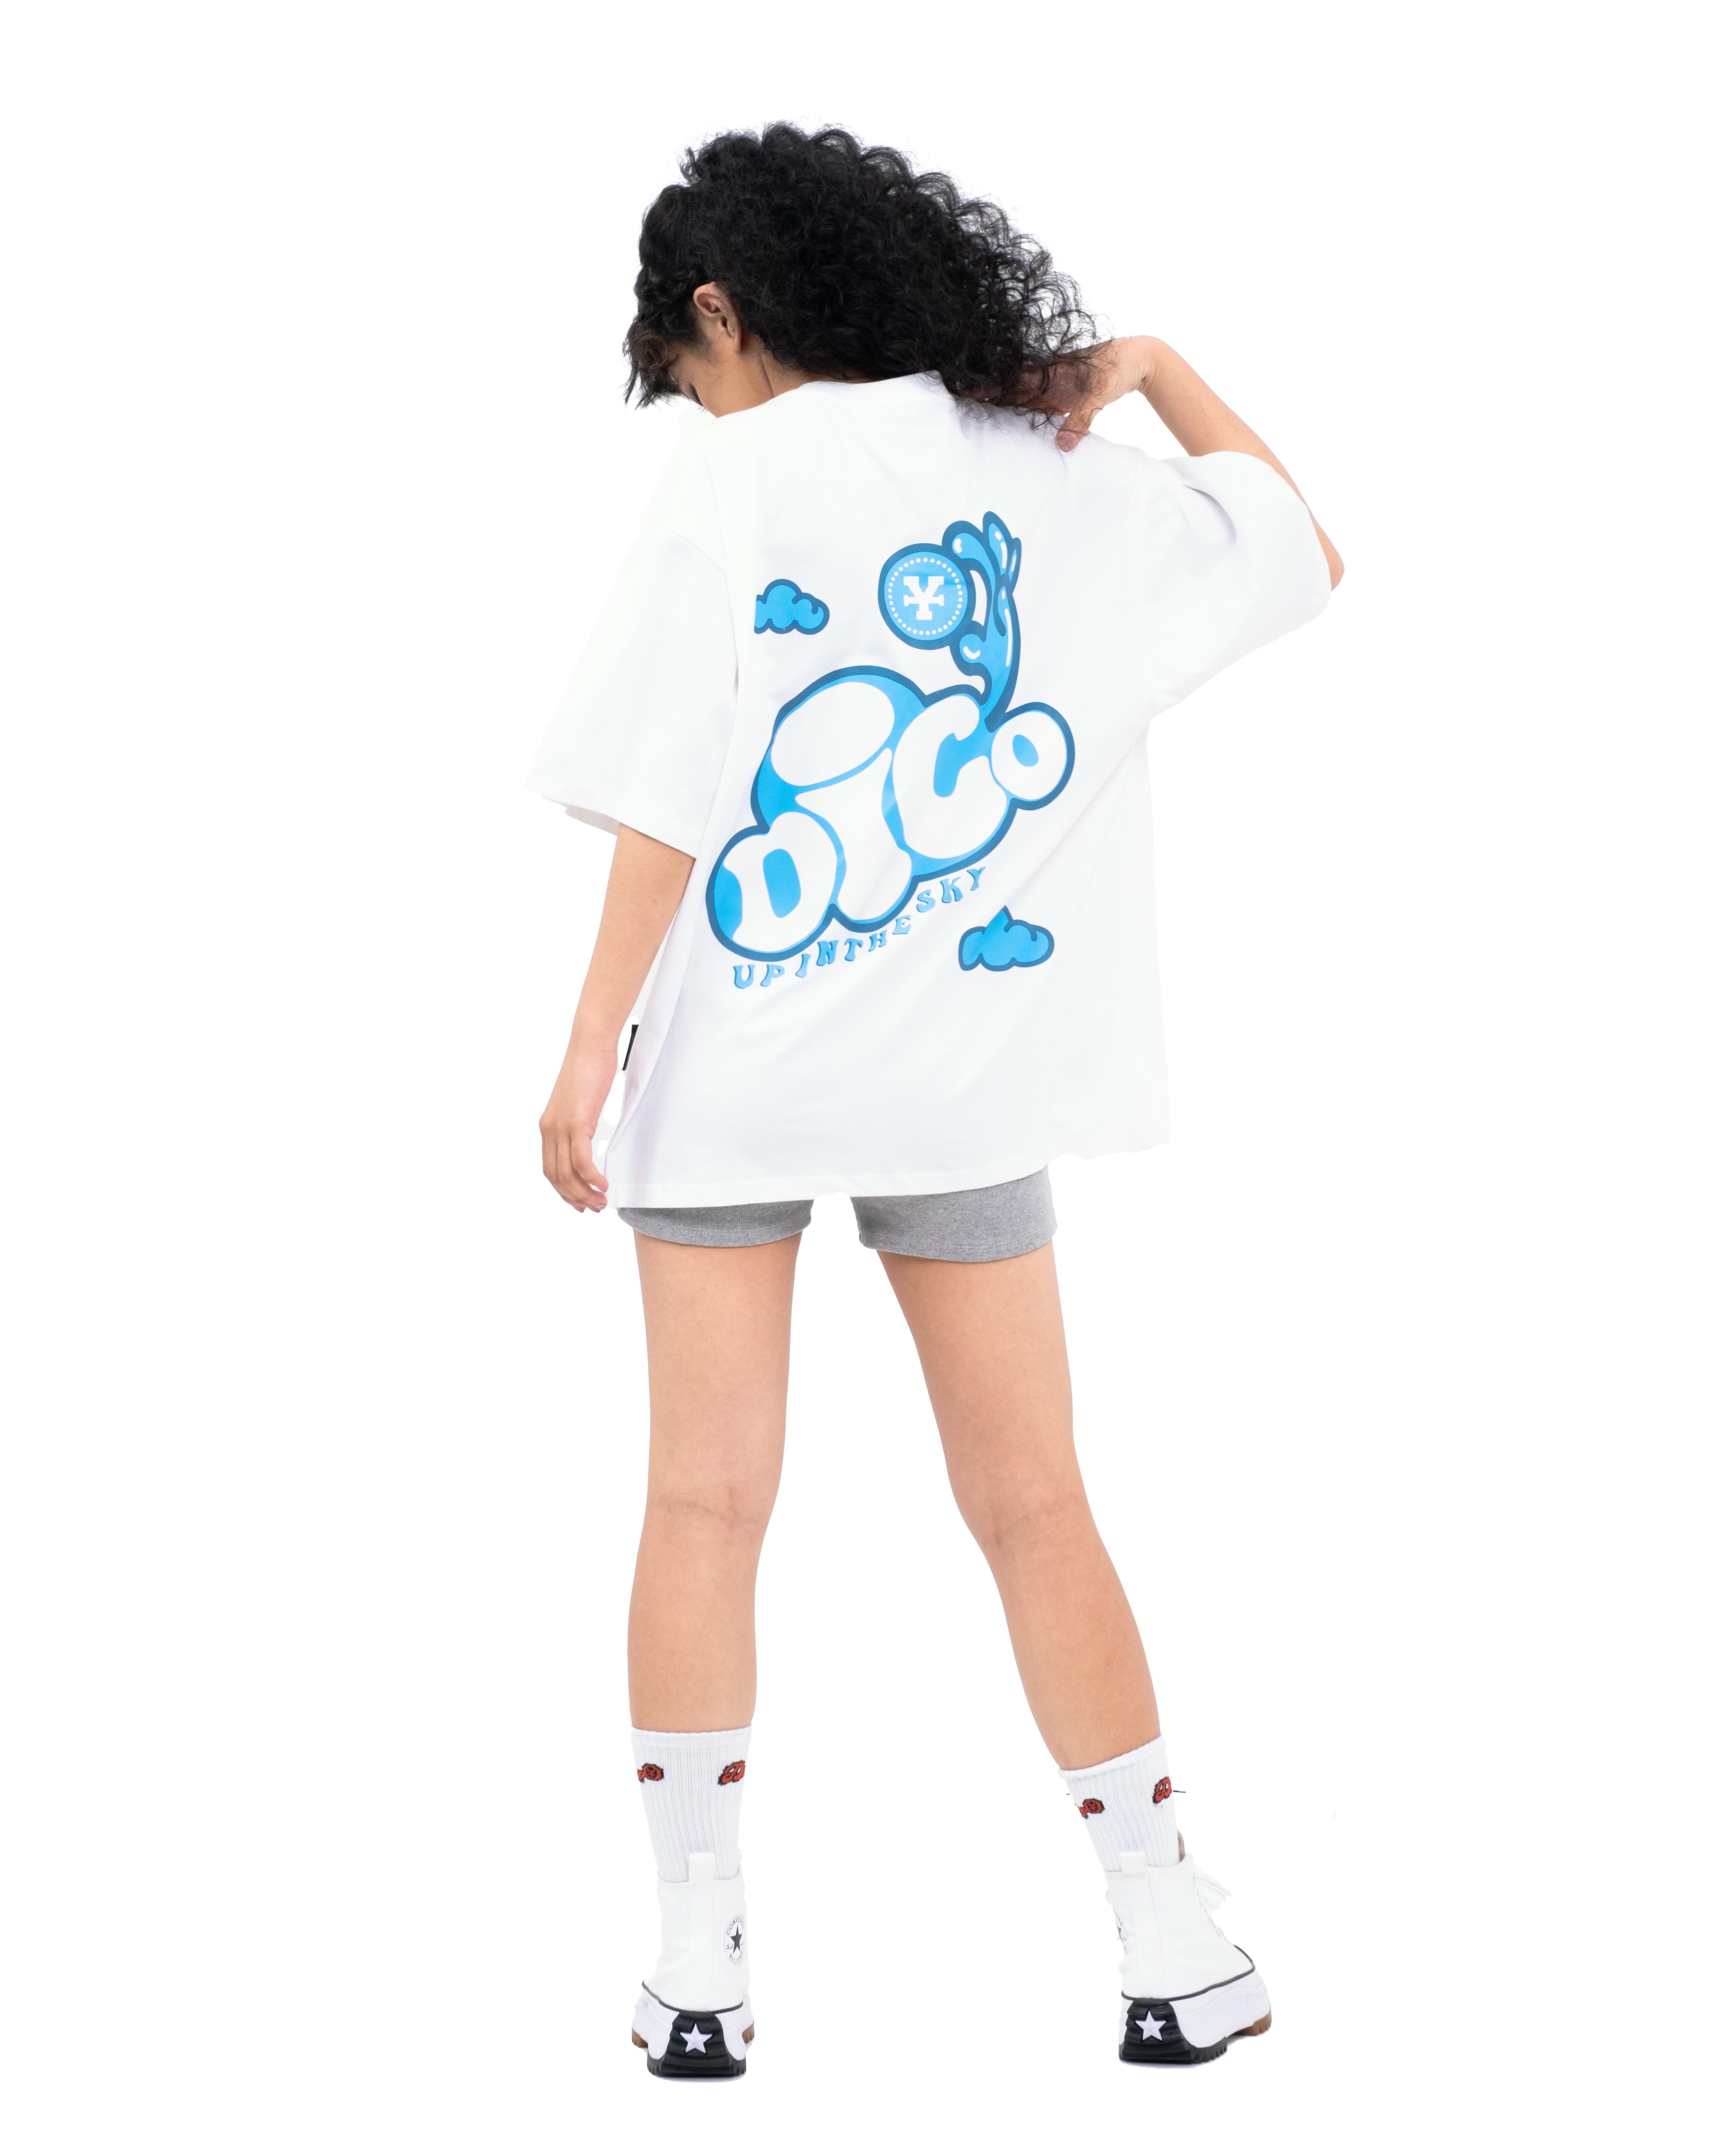 DirtyCoins Up In The Sky T-shirt - White